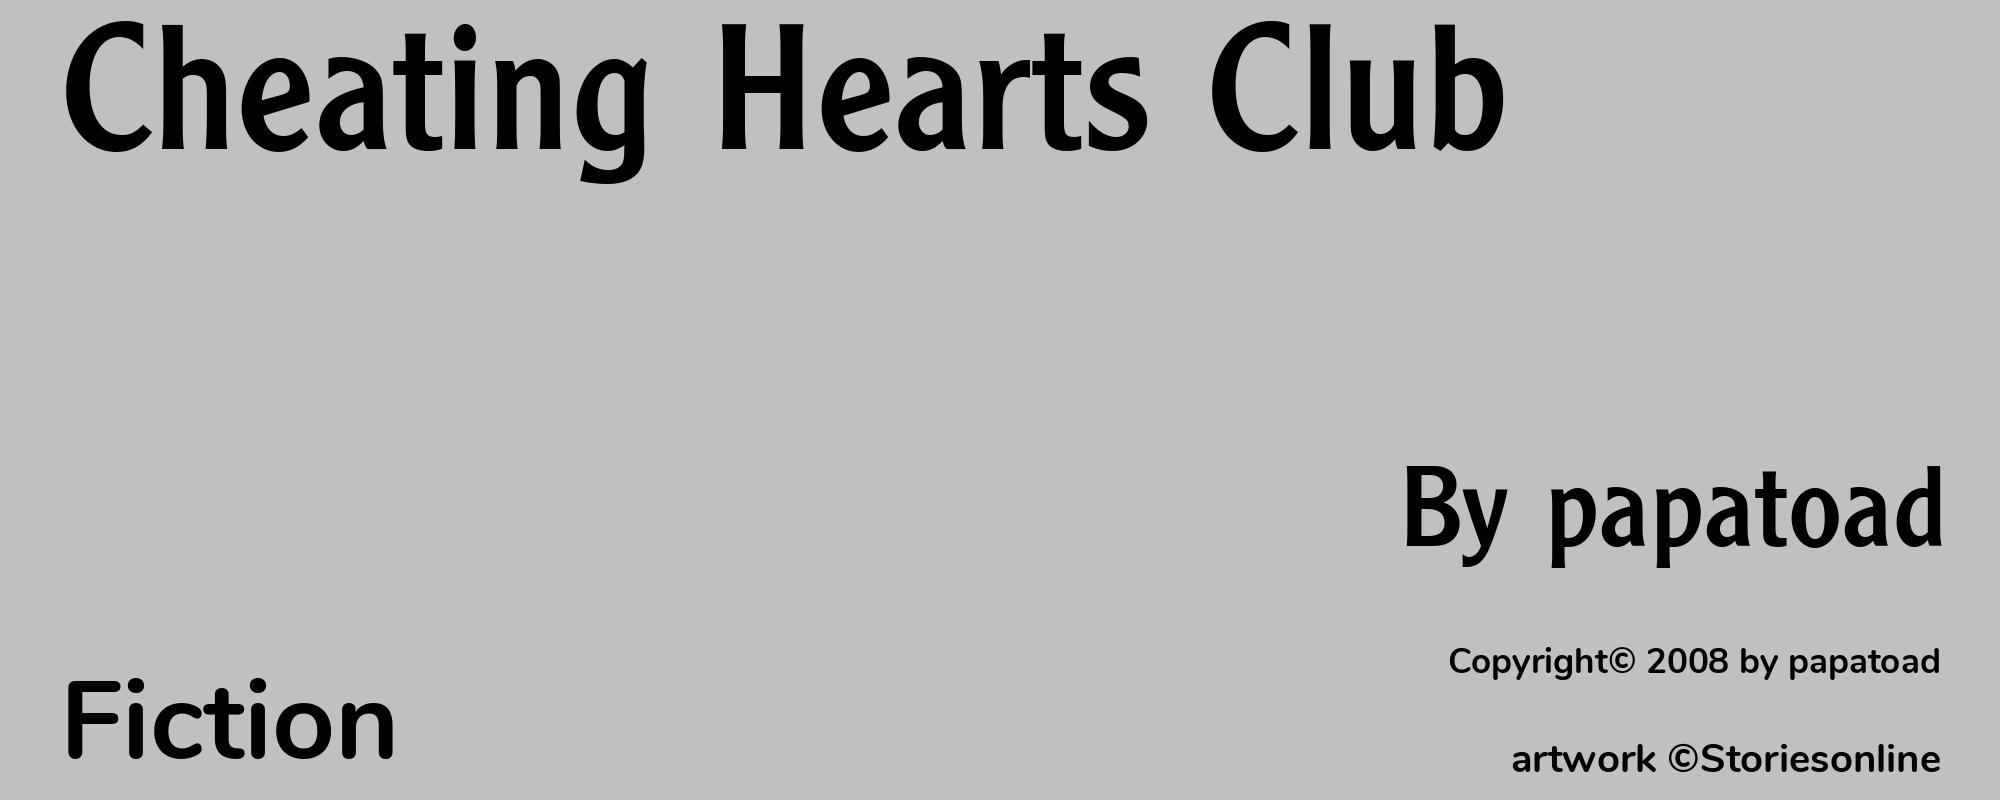 Cheating Hearts Club - Cover